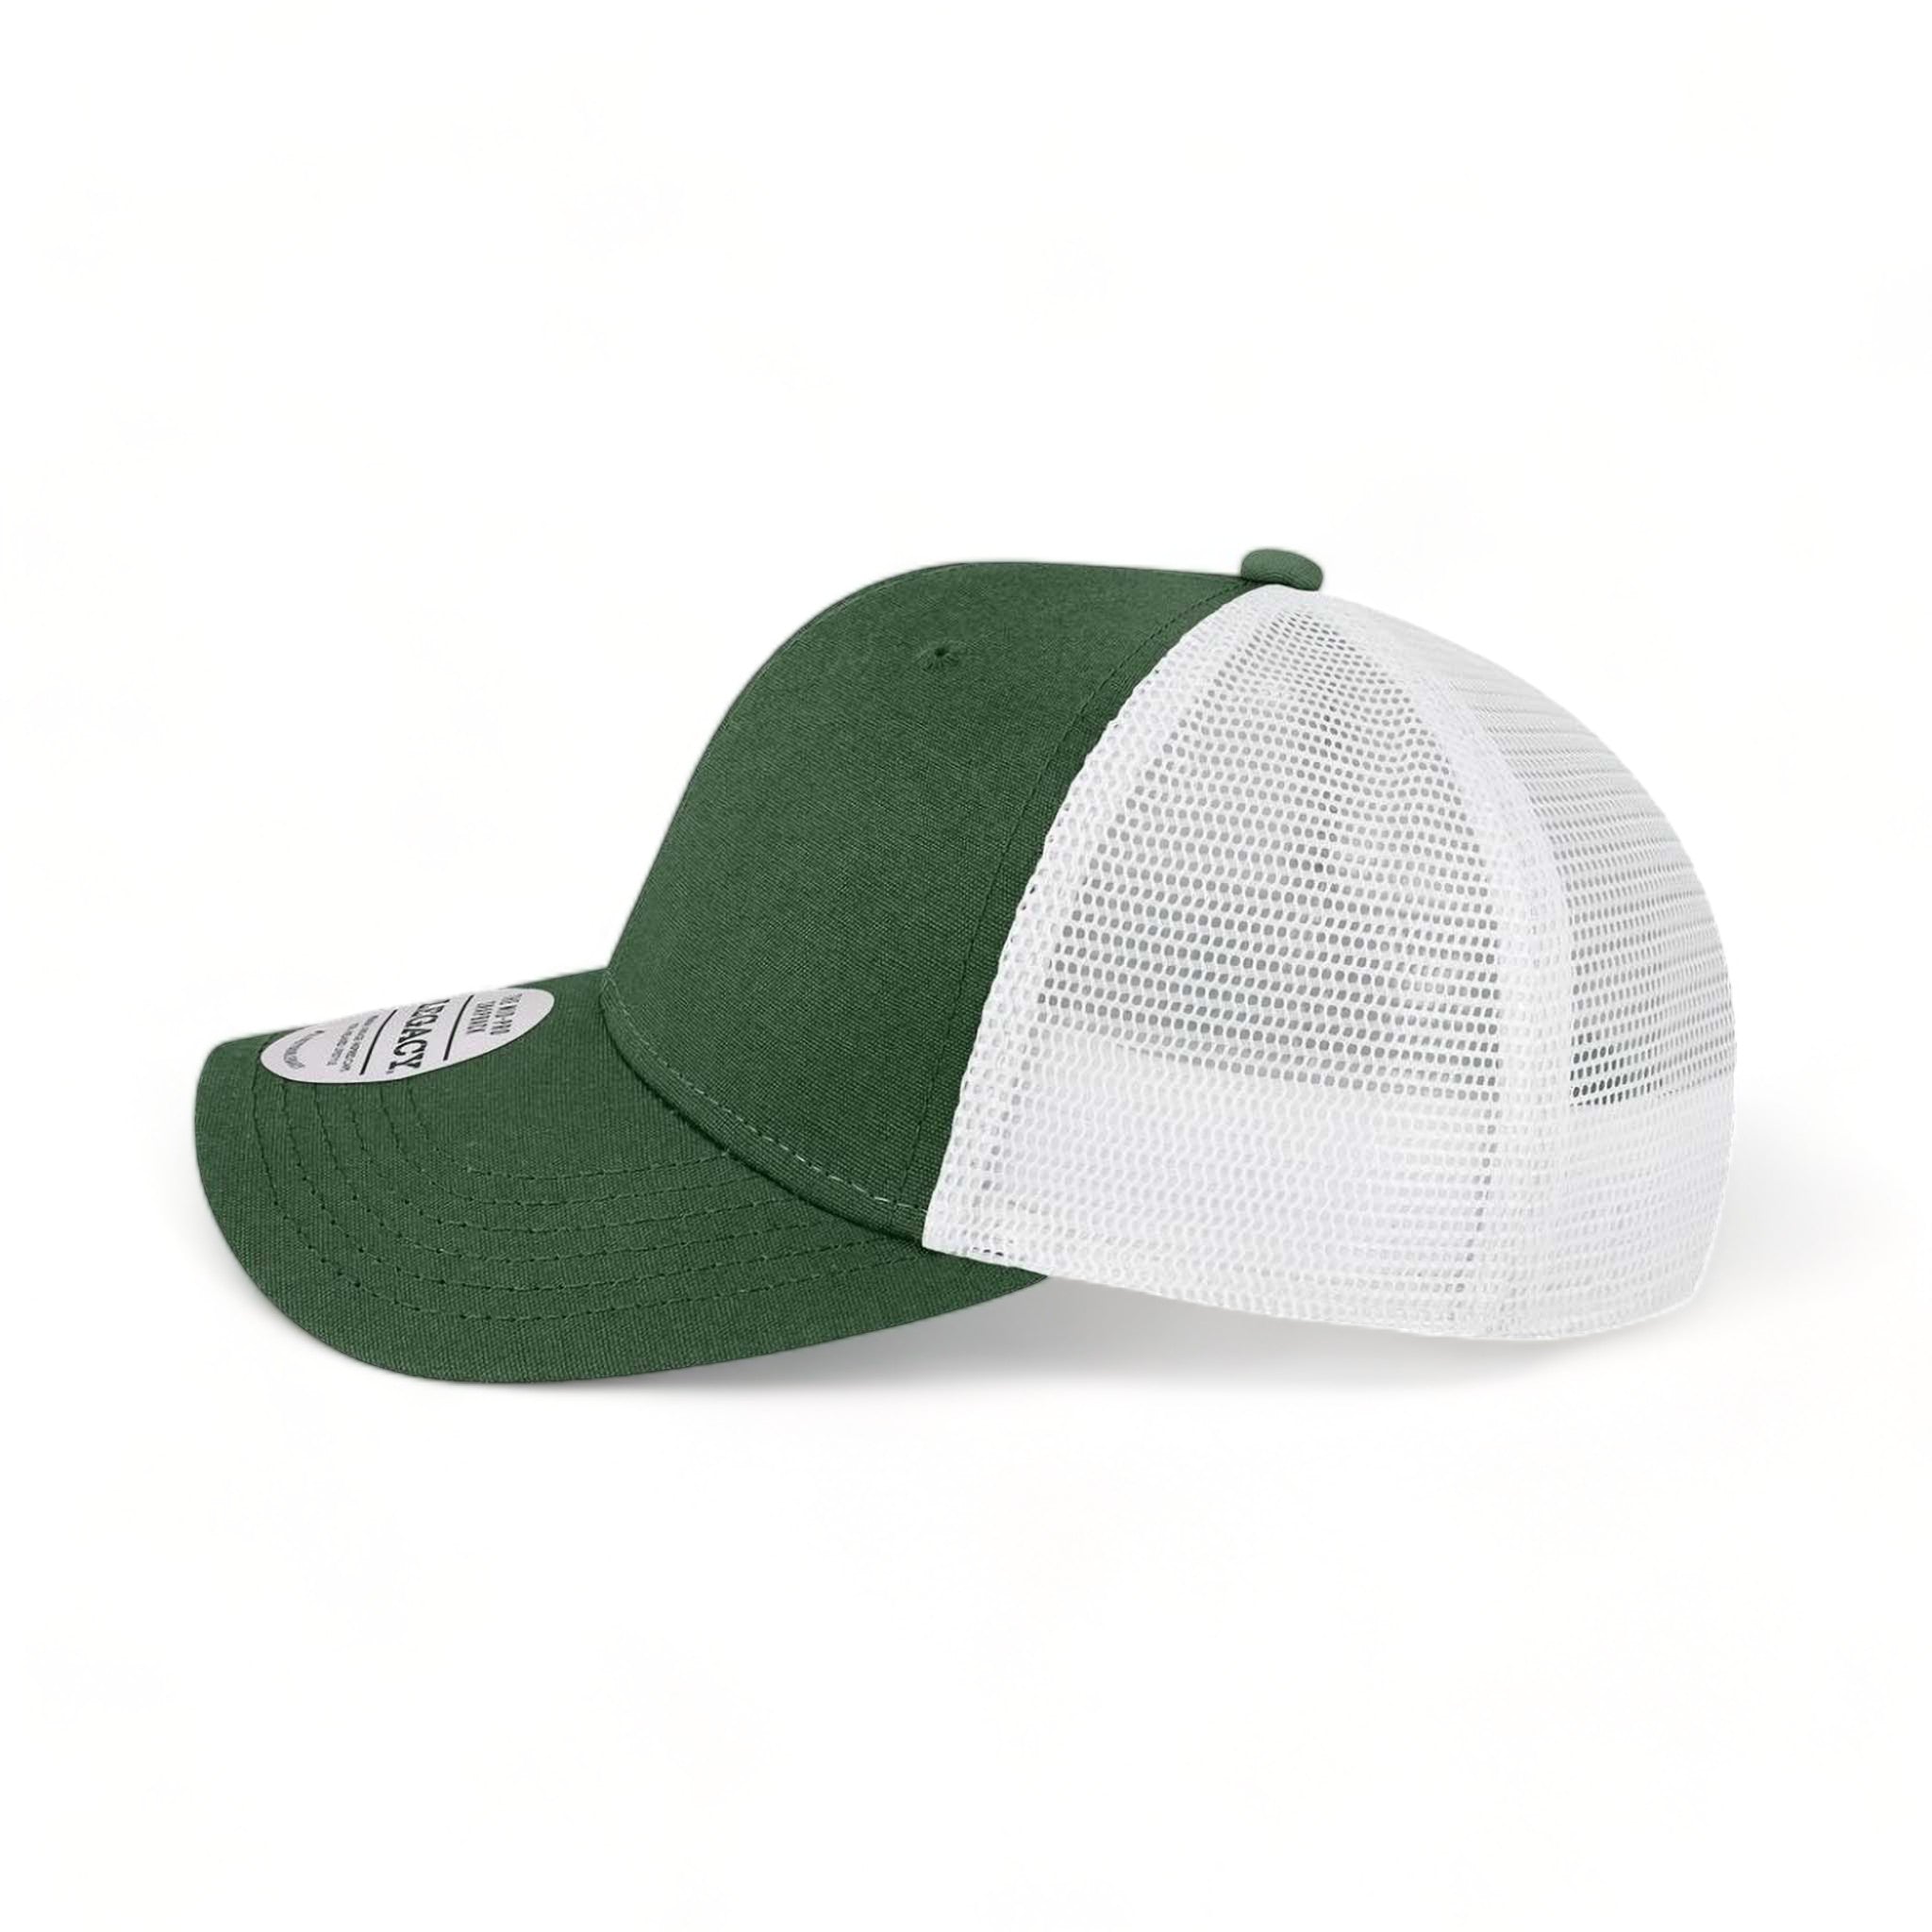 Side view of LEGACY MPS custom hat in dark green and white